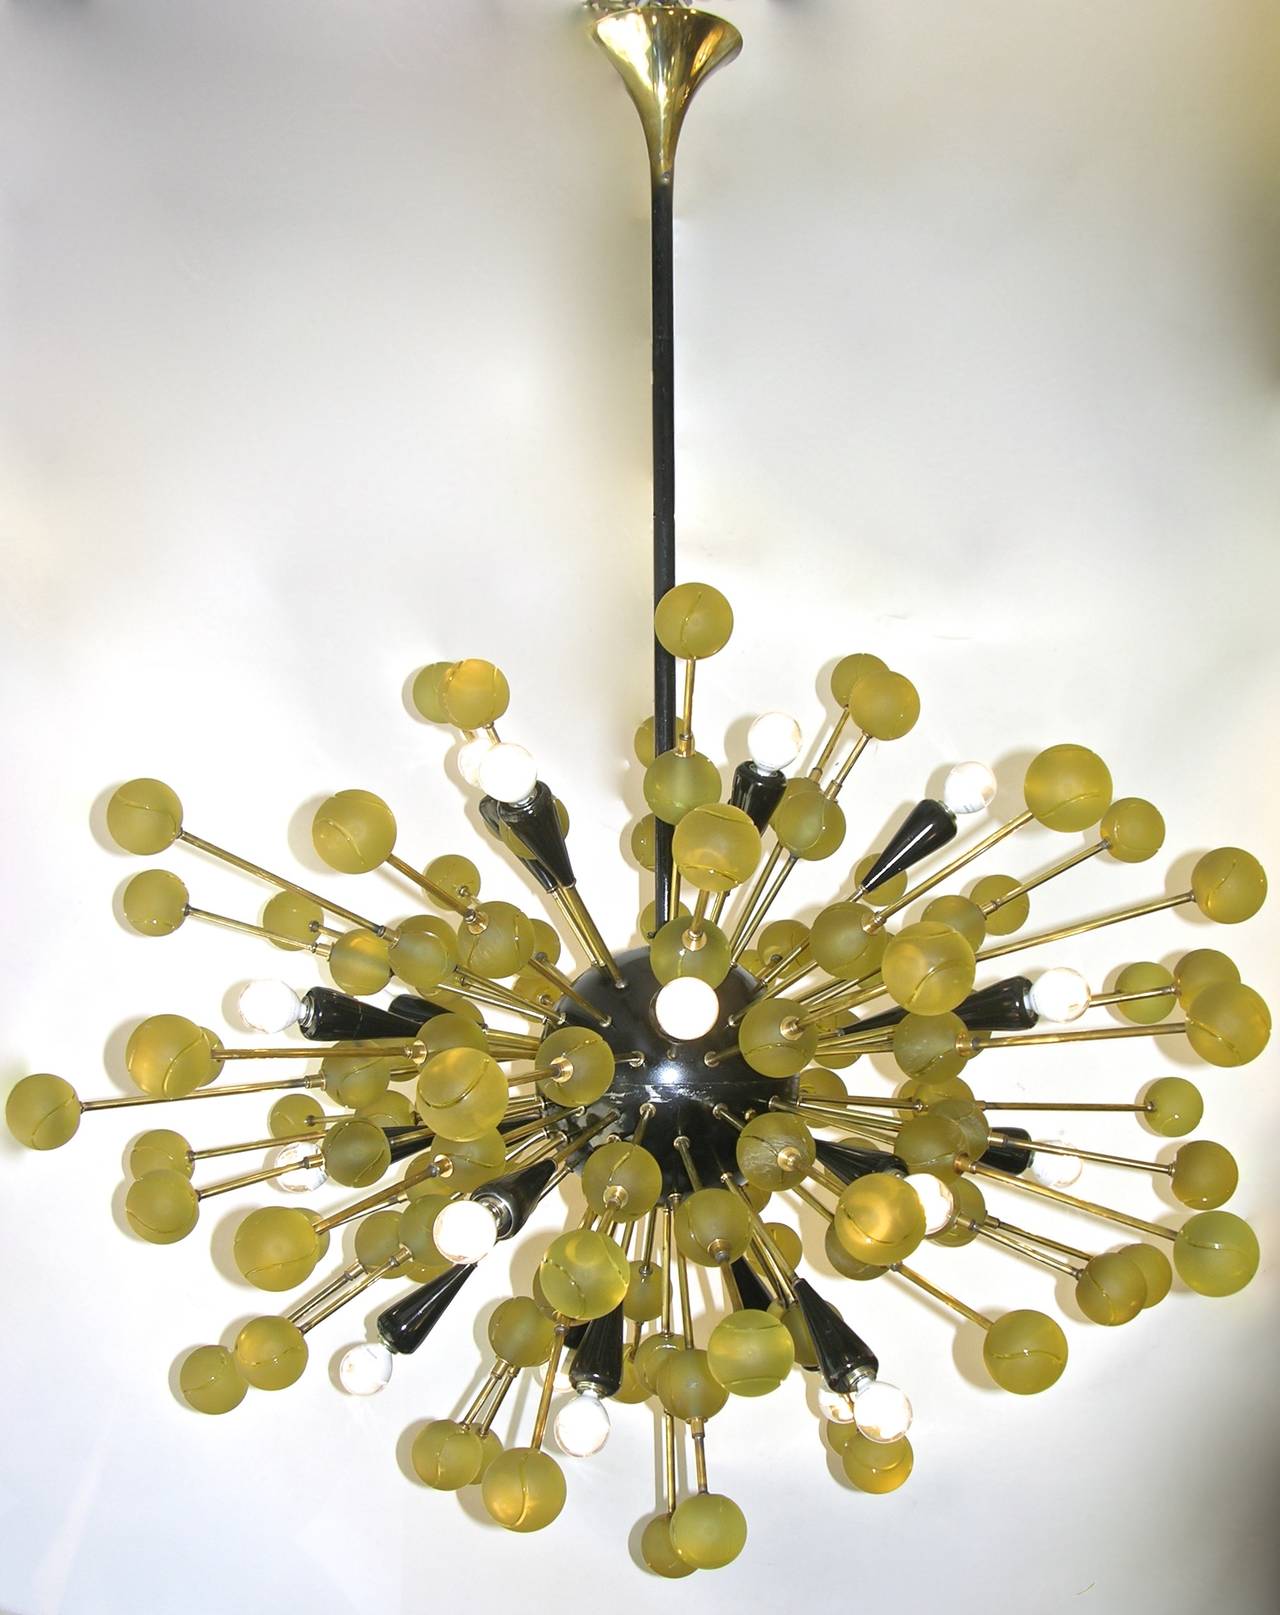 1980s unique Italian organic and very fun chandelier, entirely handcrafted, bronze rods decorated with high quality yellow solid Murano glass spheres, etched with swirls that make them resemble to tennis balls, jutting out of a central black painted